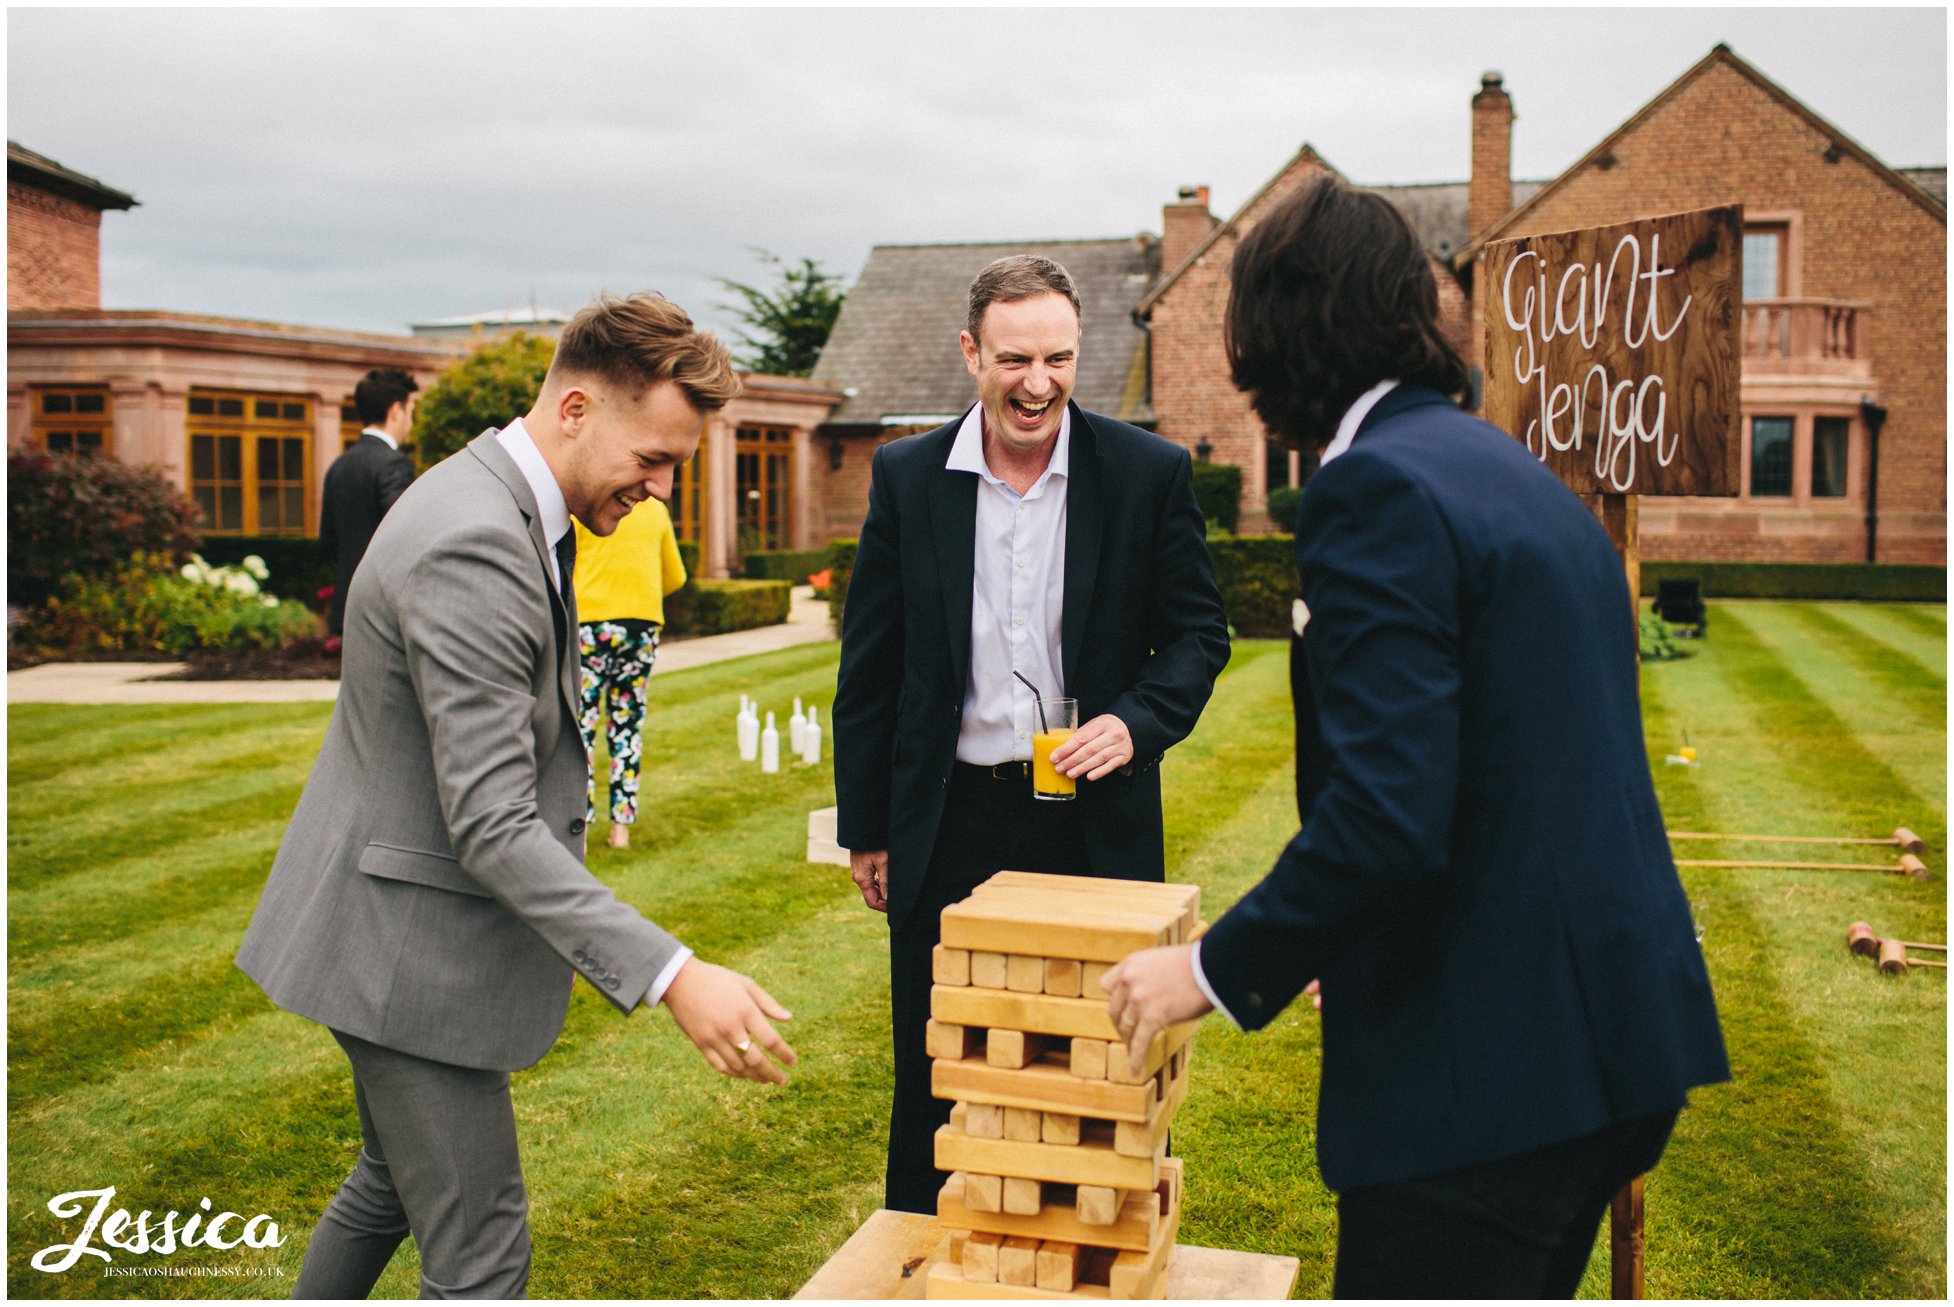 guests enjoy playing giant jenga at the cheshire wedding